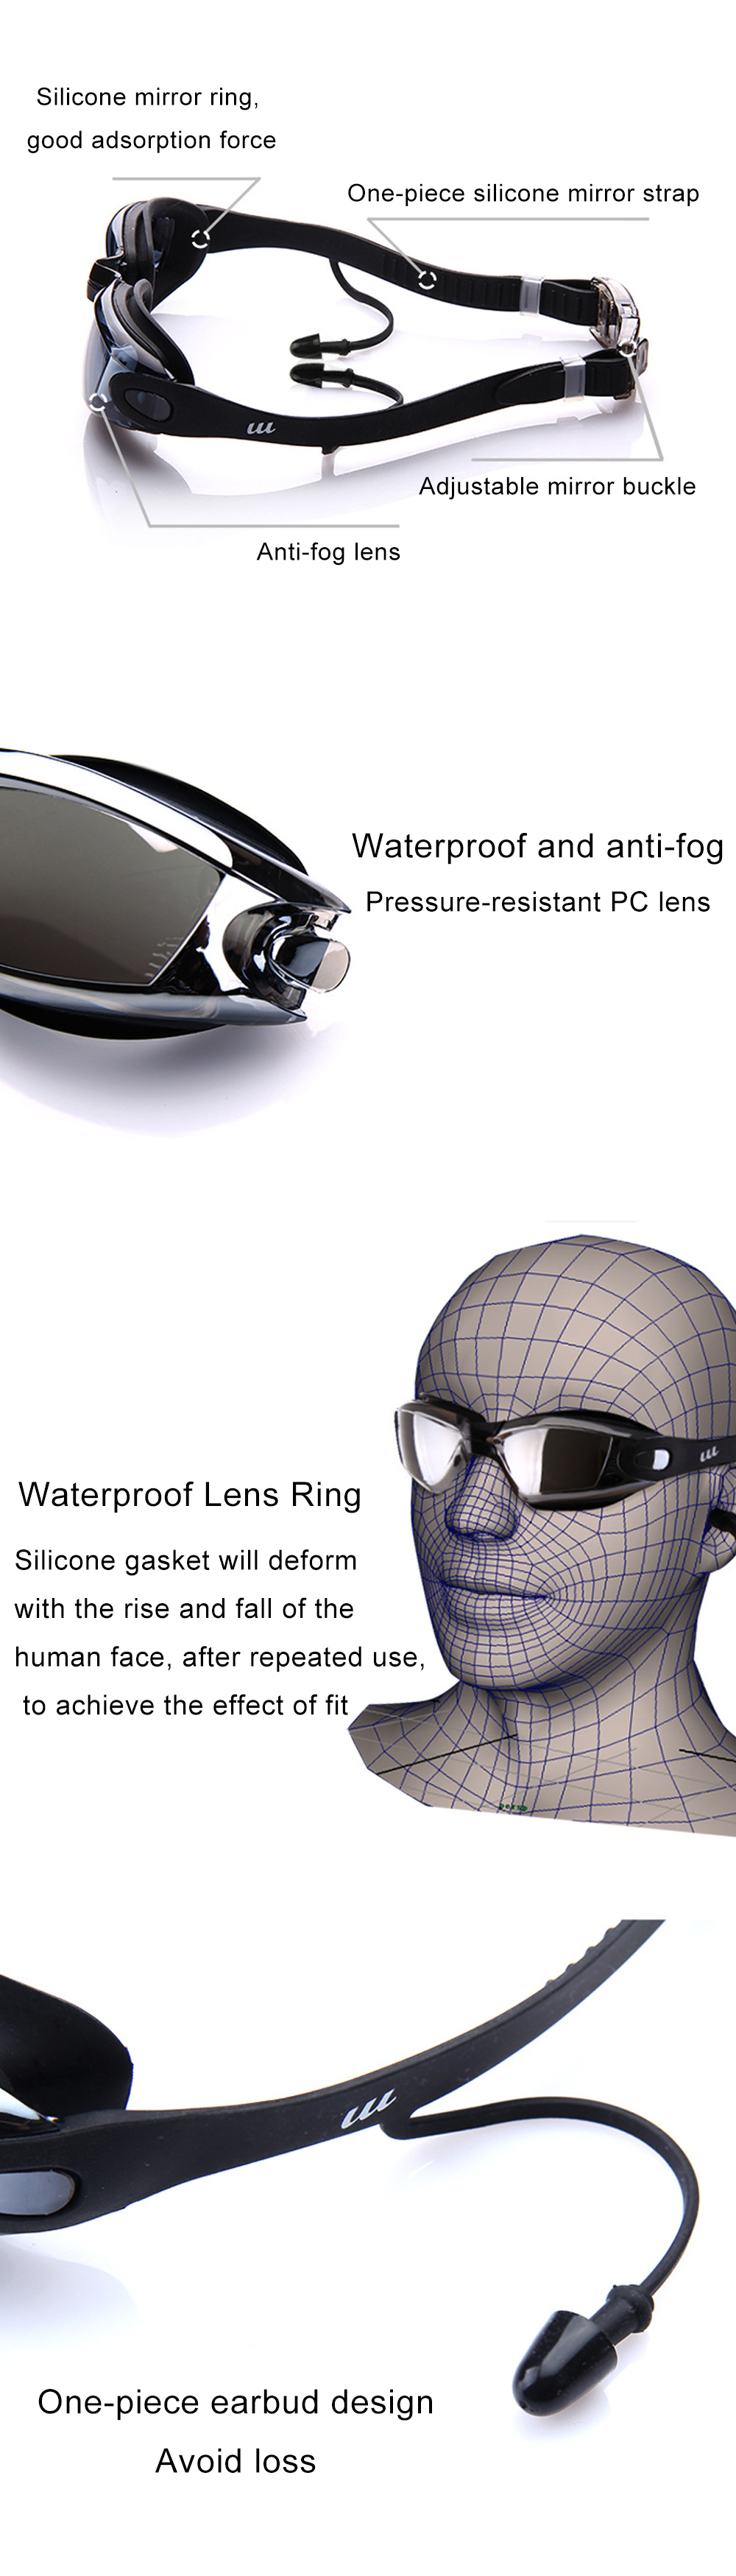 Swimming-Goggles-One-piece-Earplug-No-Leaking-Anti-Fog-Clear-Vision-Large-Frame-Eye-Protection-Wide--1881118-1